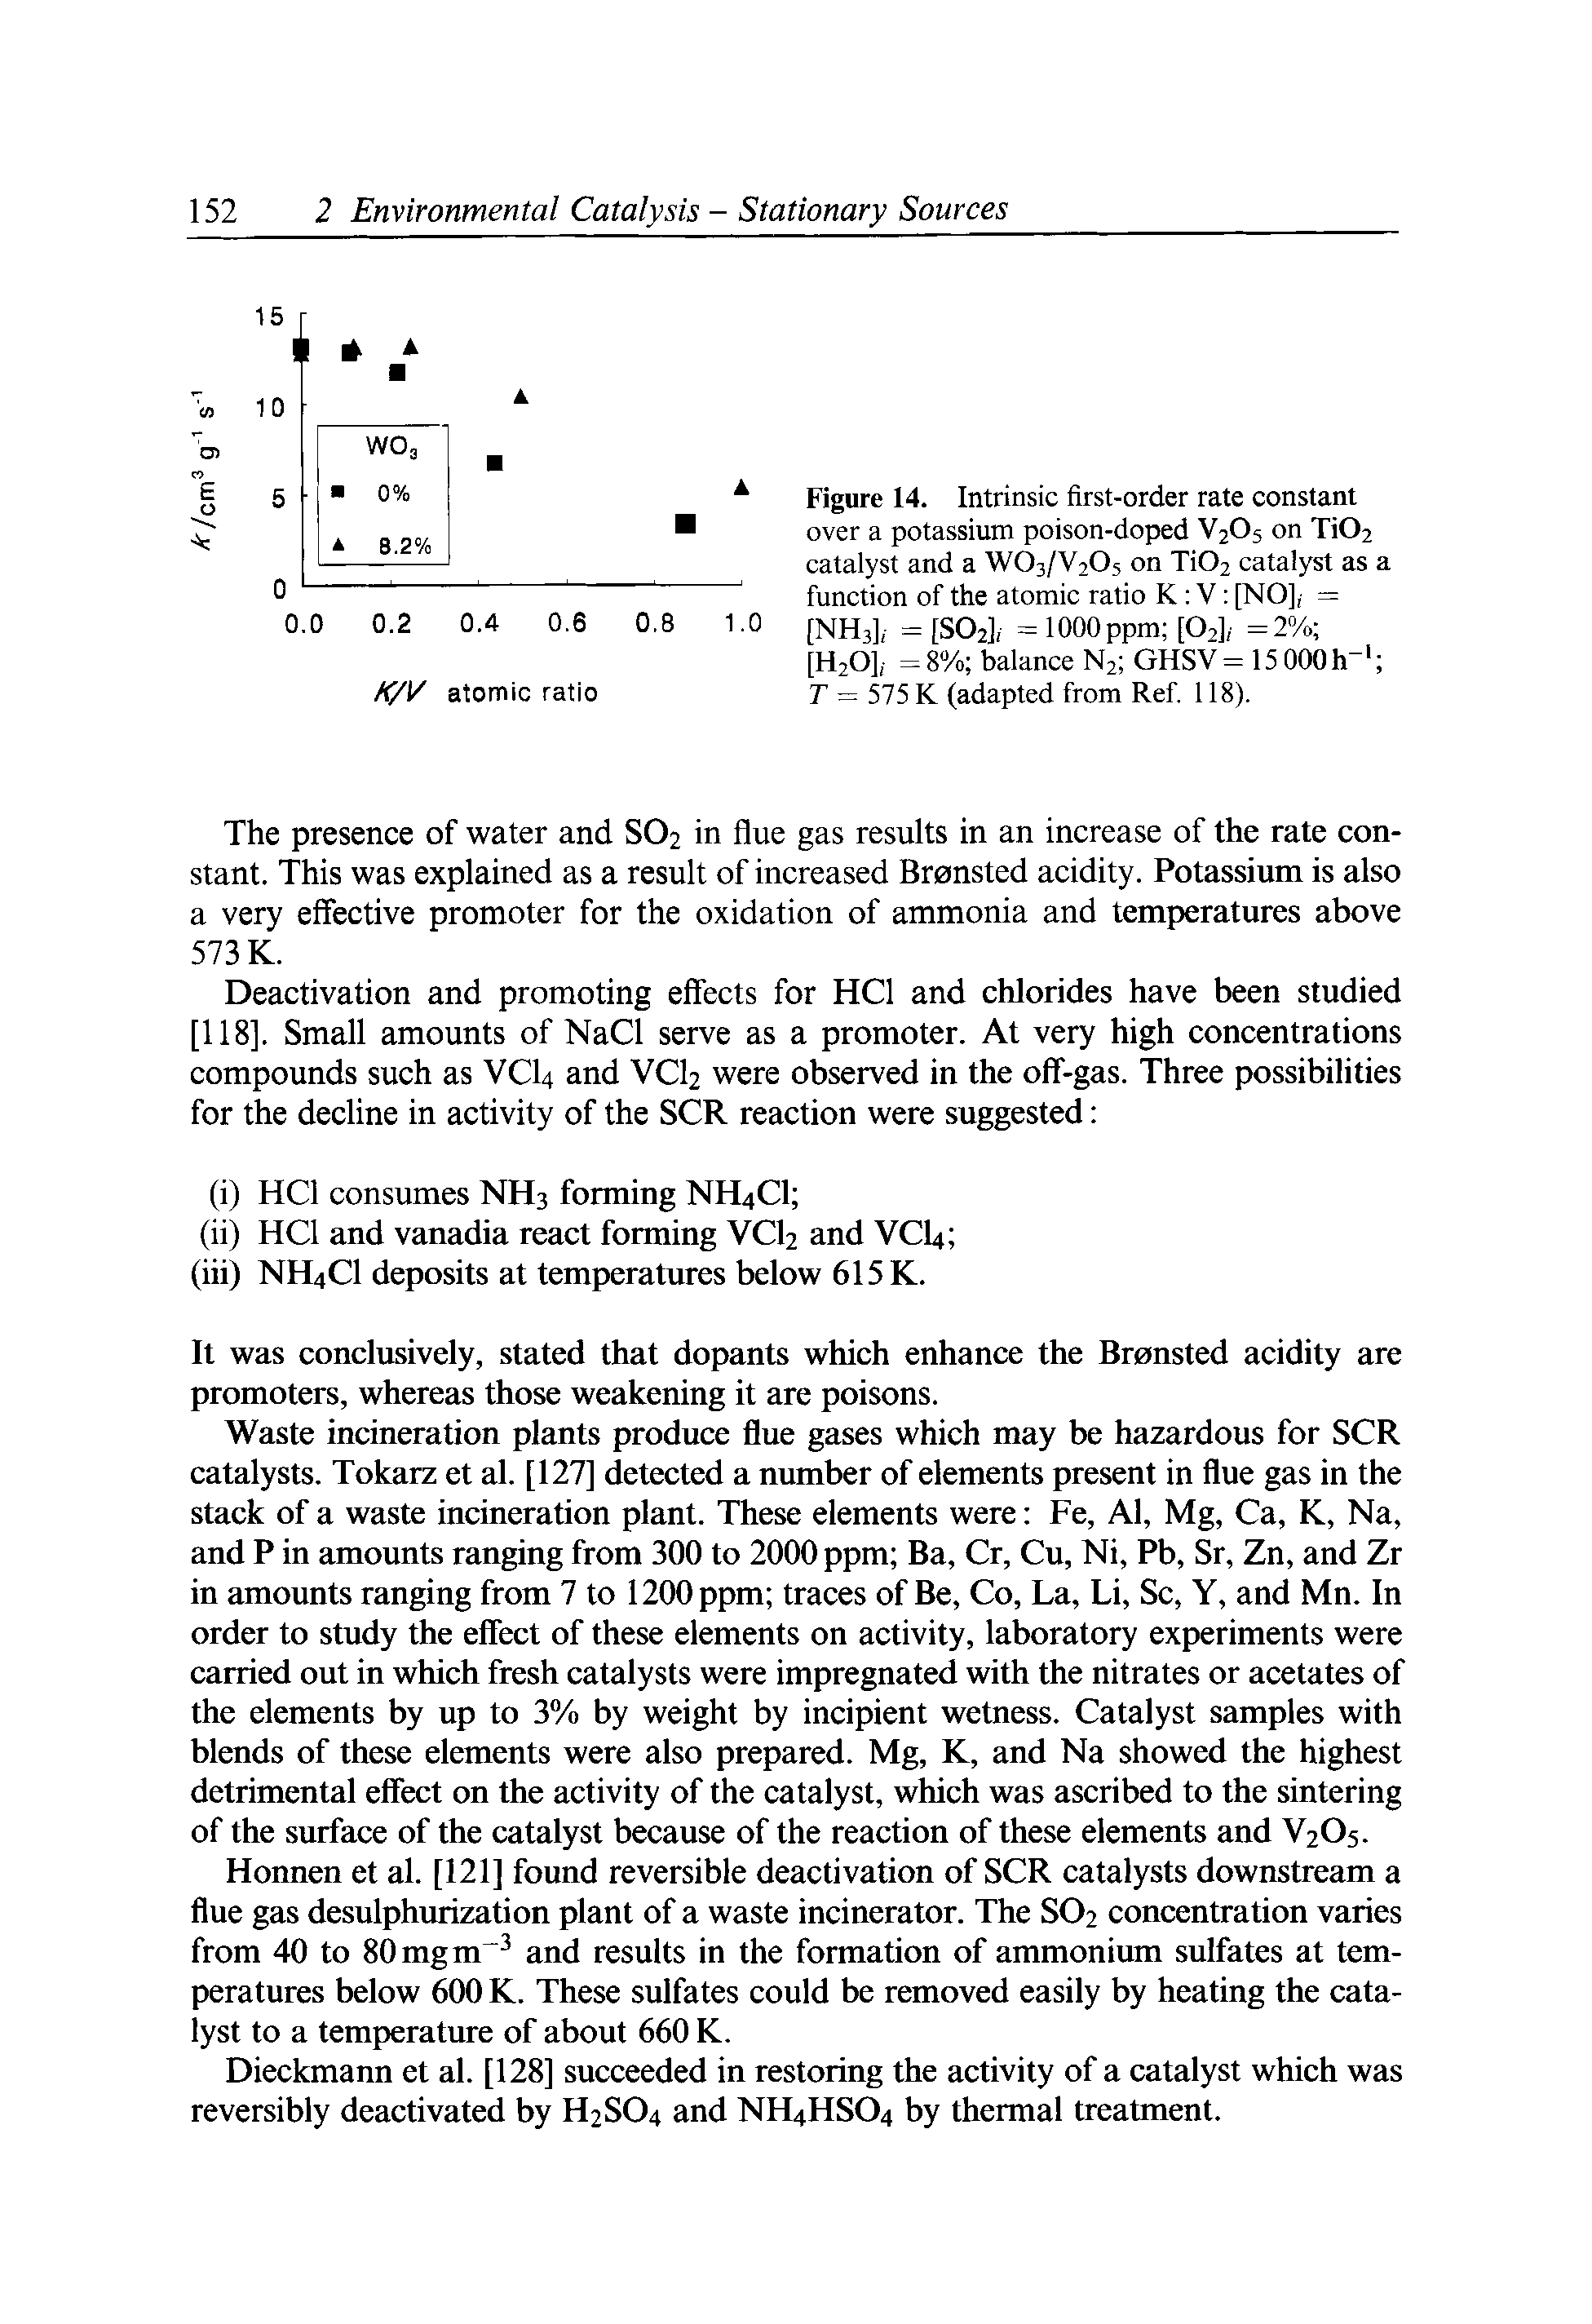 Figure 14. Intrinsic first-order rate constant over a potassium poison-doped V2O5 on Ti02 catalyst and a WO3/V2O5 on Ti02 catalyst as a function of the atomic ratio K V [NO], = [NH3], = [SO2], = 1000 ppm [O2], =2% [H2O], = 8% balance N2 GHSV = 15OOGh T = 575 K (adapted from Ref. 118).